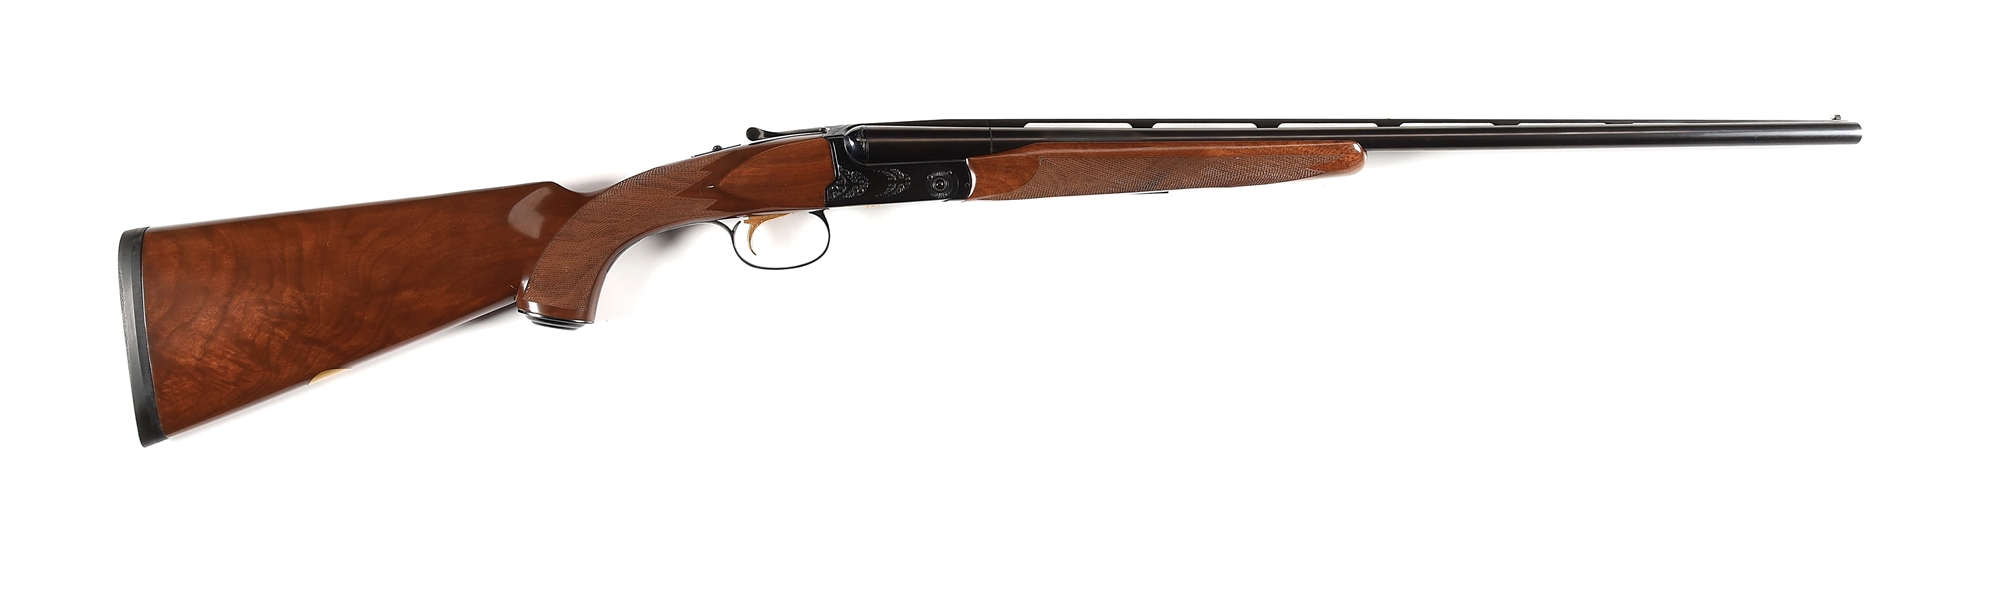 (M) WINCHESTER MODEL 23 28 GAUGE SIDE BY SIDE SHOTGUN WITH CASE AND BOX.